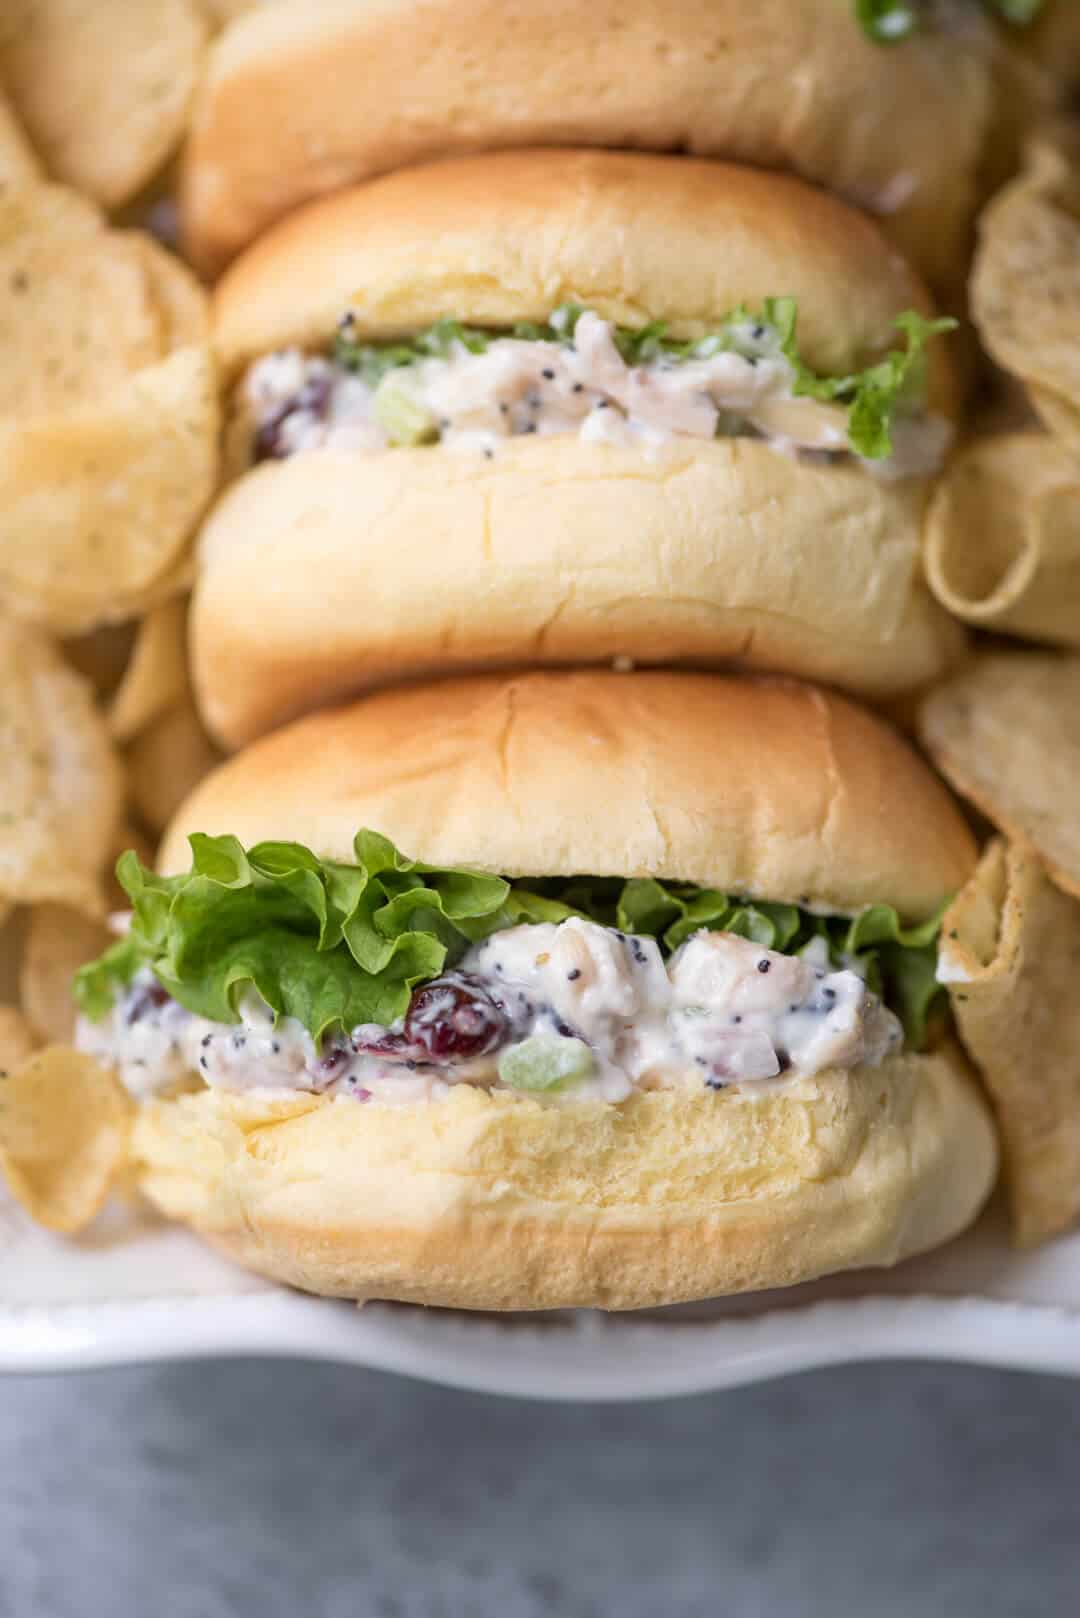 Cranberry Almond Poppy Seed Chicken Salad on potato buns with green leaf lettuce in a white serving dish with potato chips.